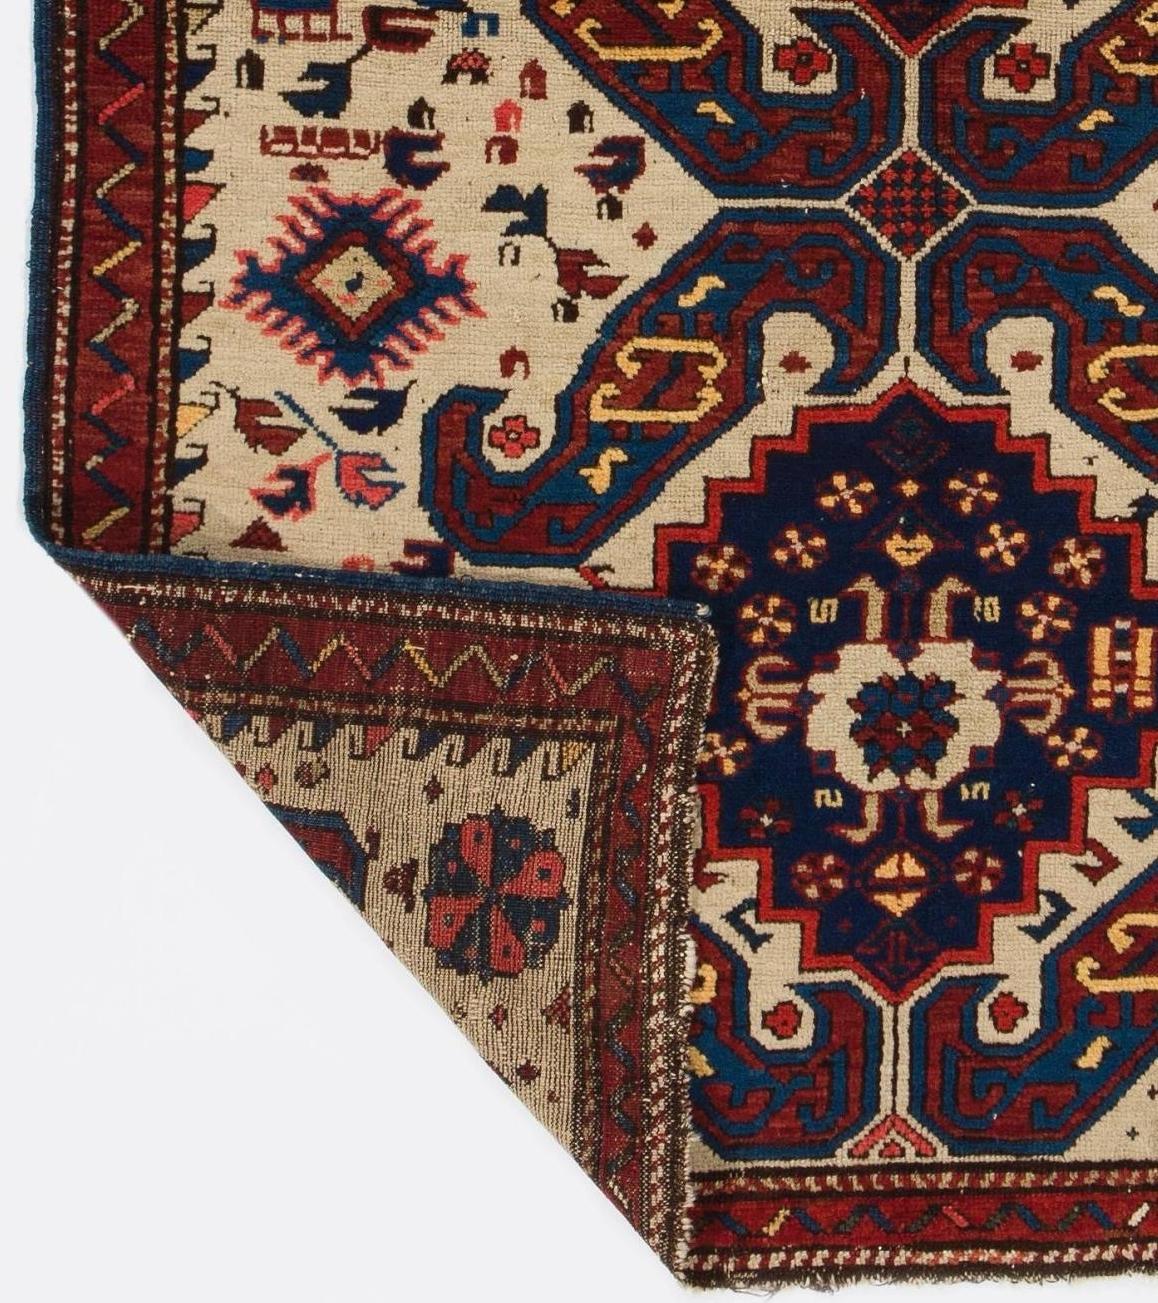 Antique Caucasian Seichur rug, circa 1880. Finely hand-knotted with even medium wool pile on wool foundation. Origin good condition. Washed professionally. All natural dyes. Measures: 3'6'' x 5'2''.